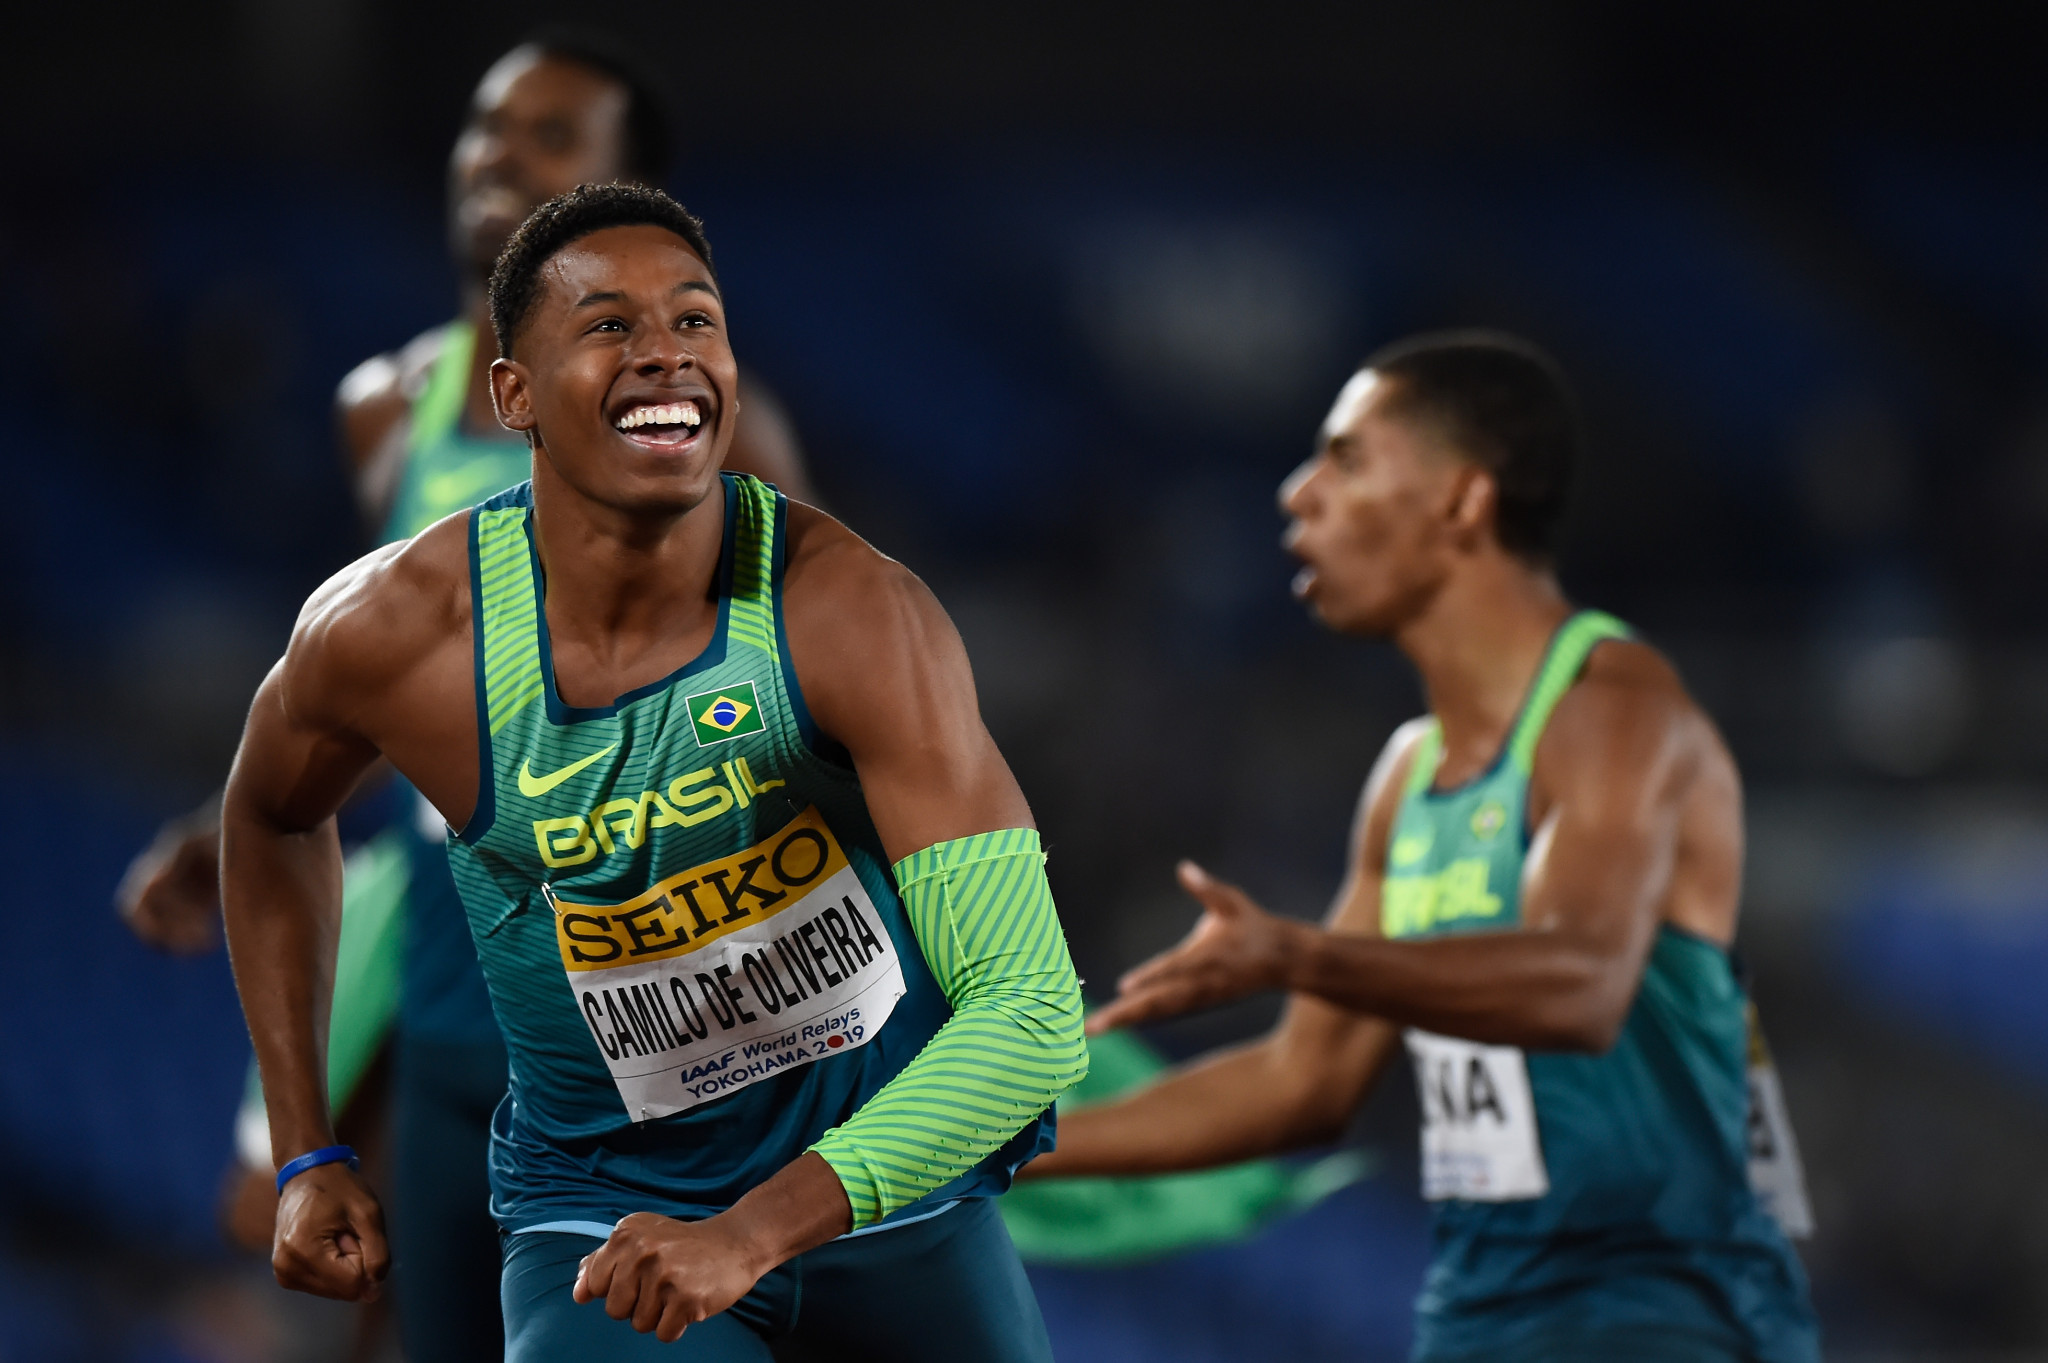  Brazil beat US and British world champions to earn shock men’s 4x100m gold at IAAF World Relays